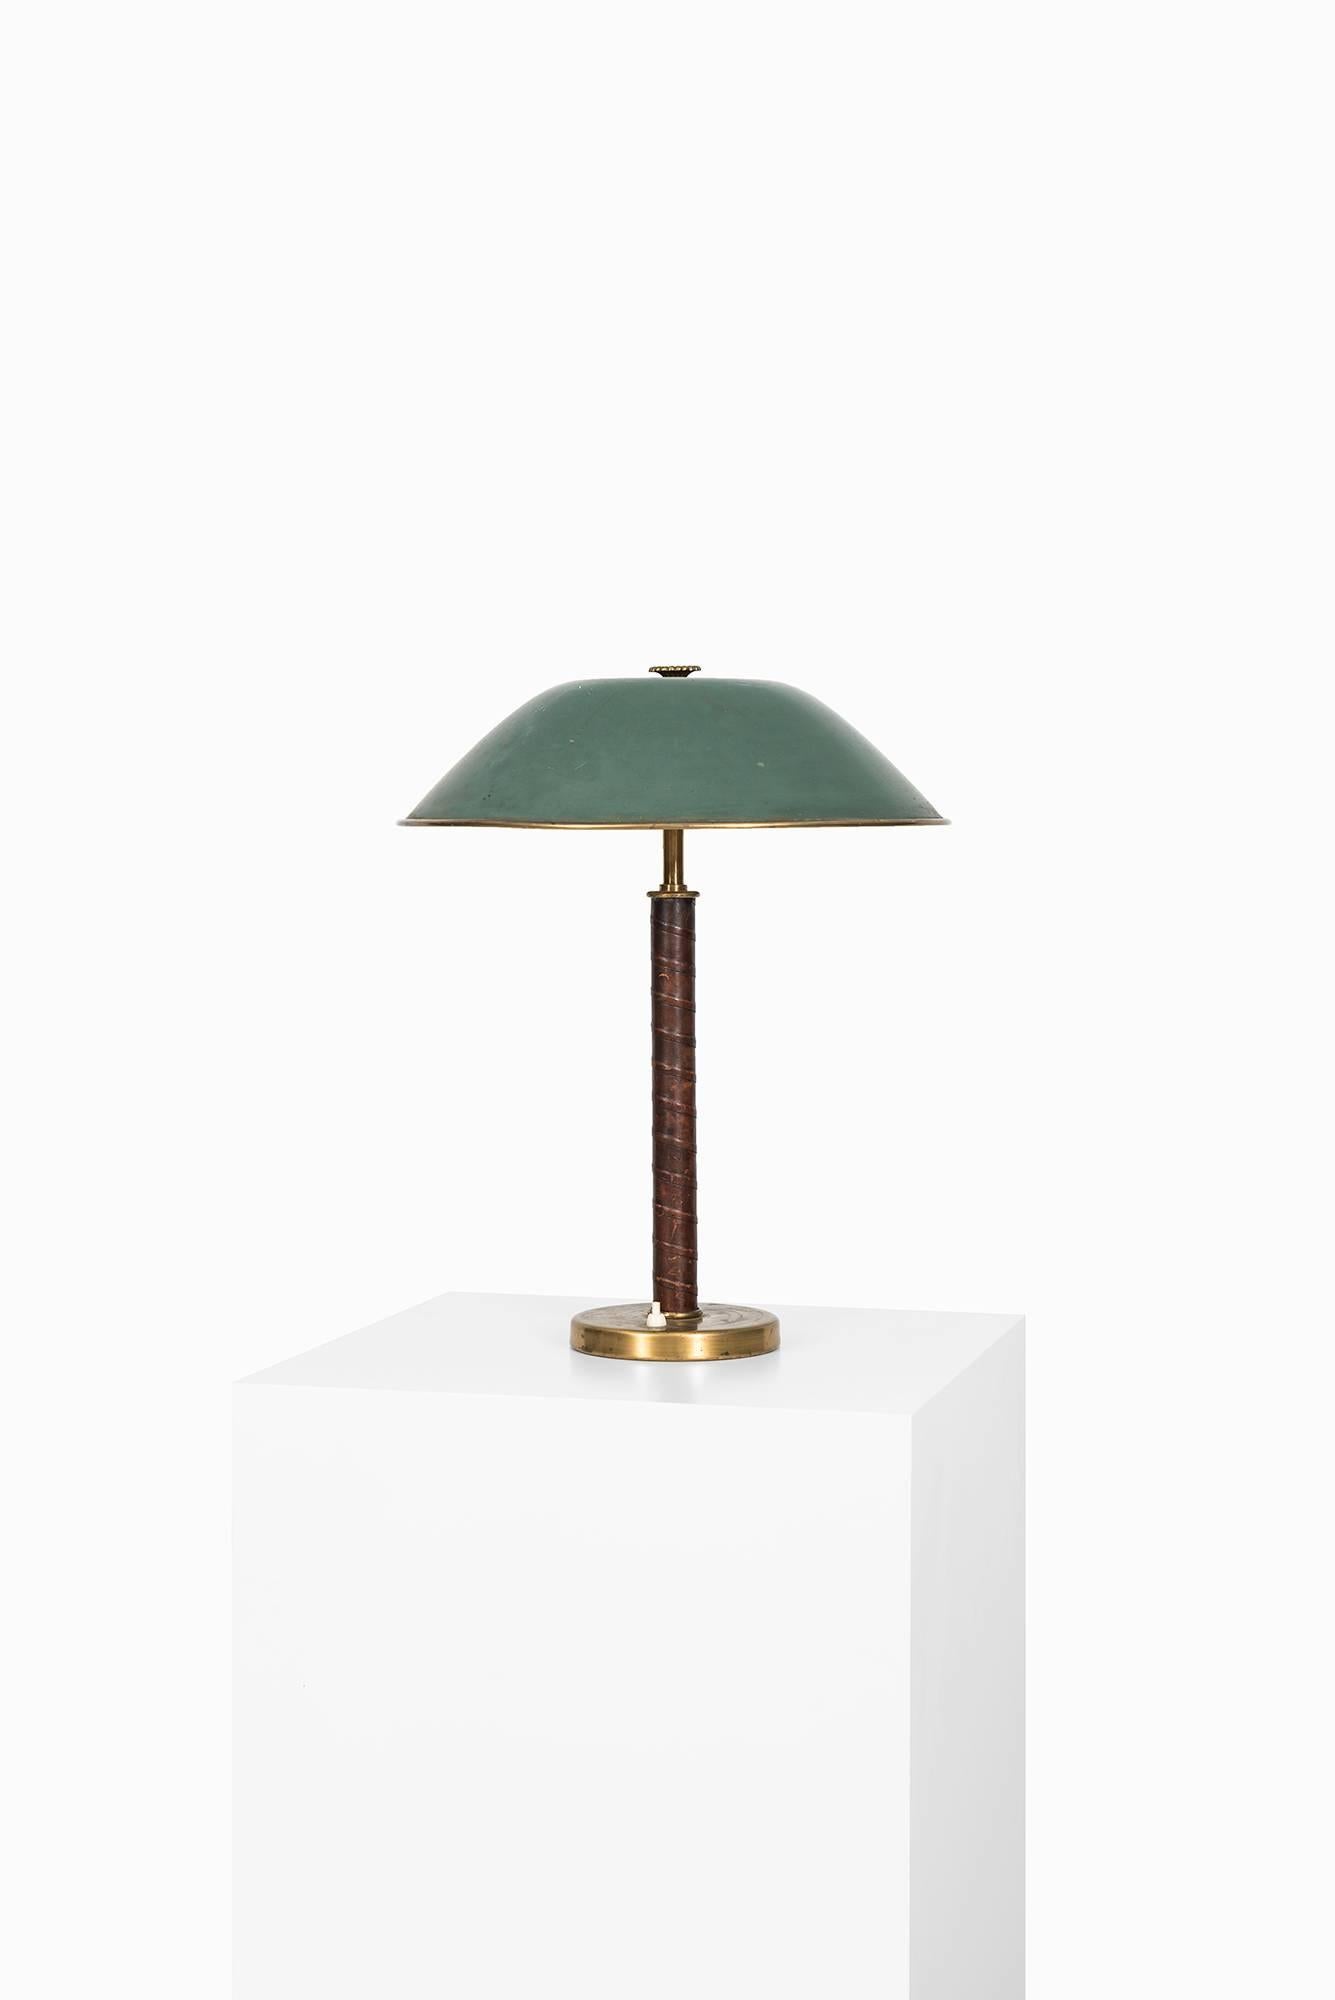 Rare table lamp produced by NK in Sweden.